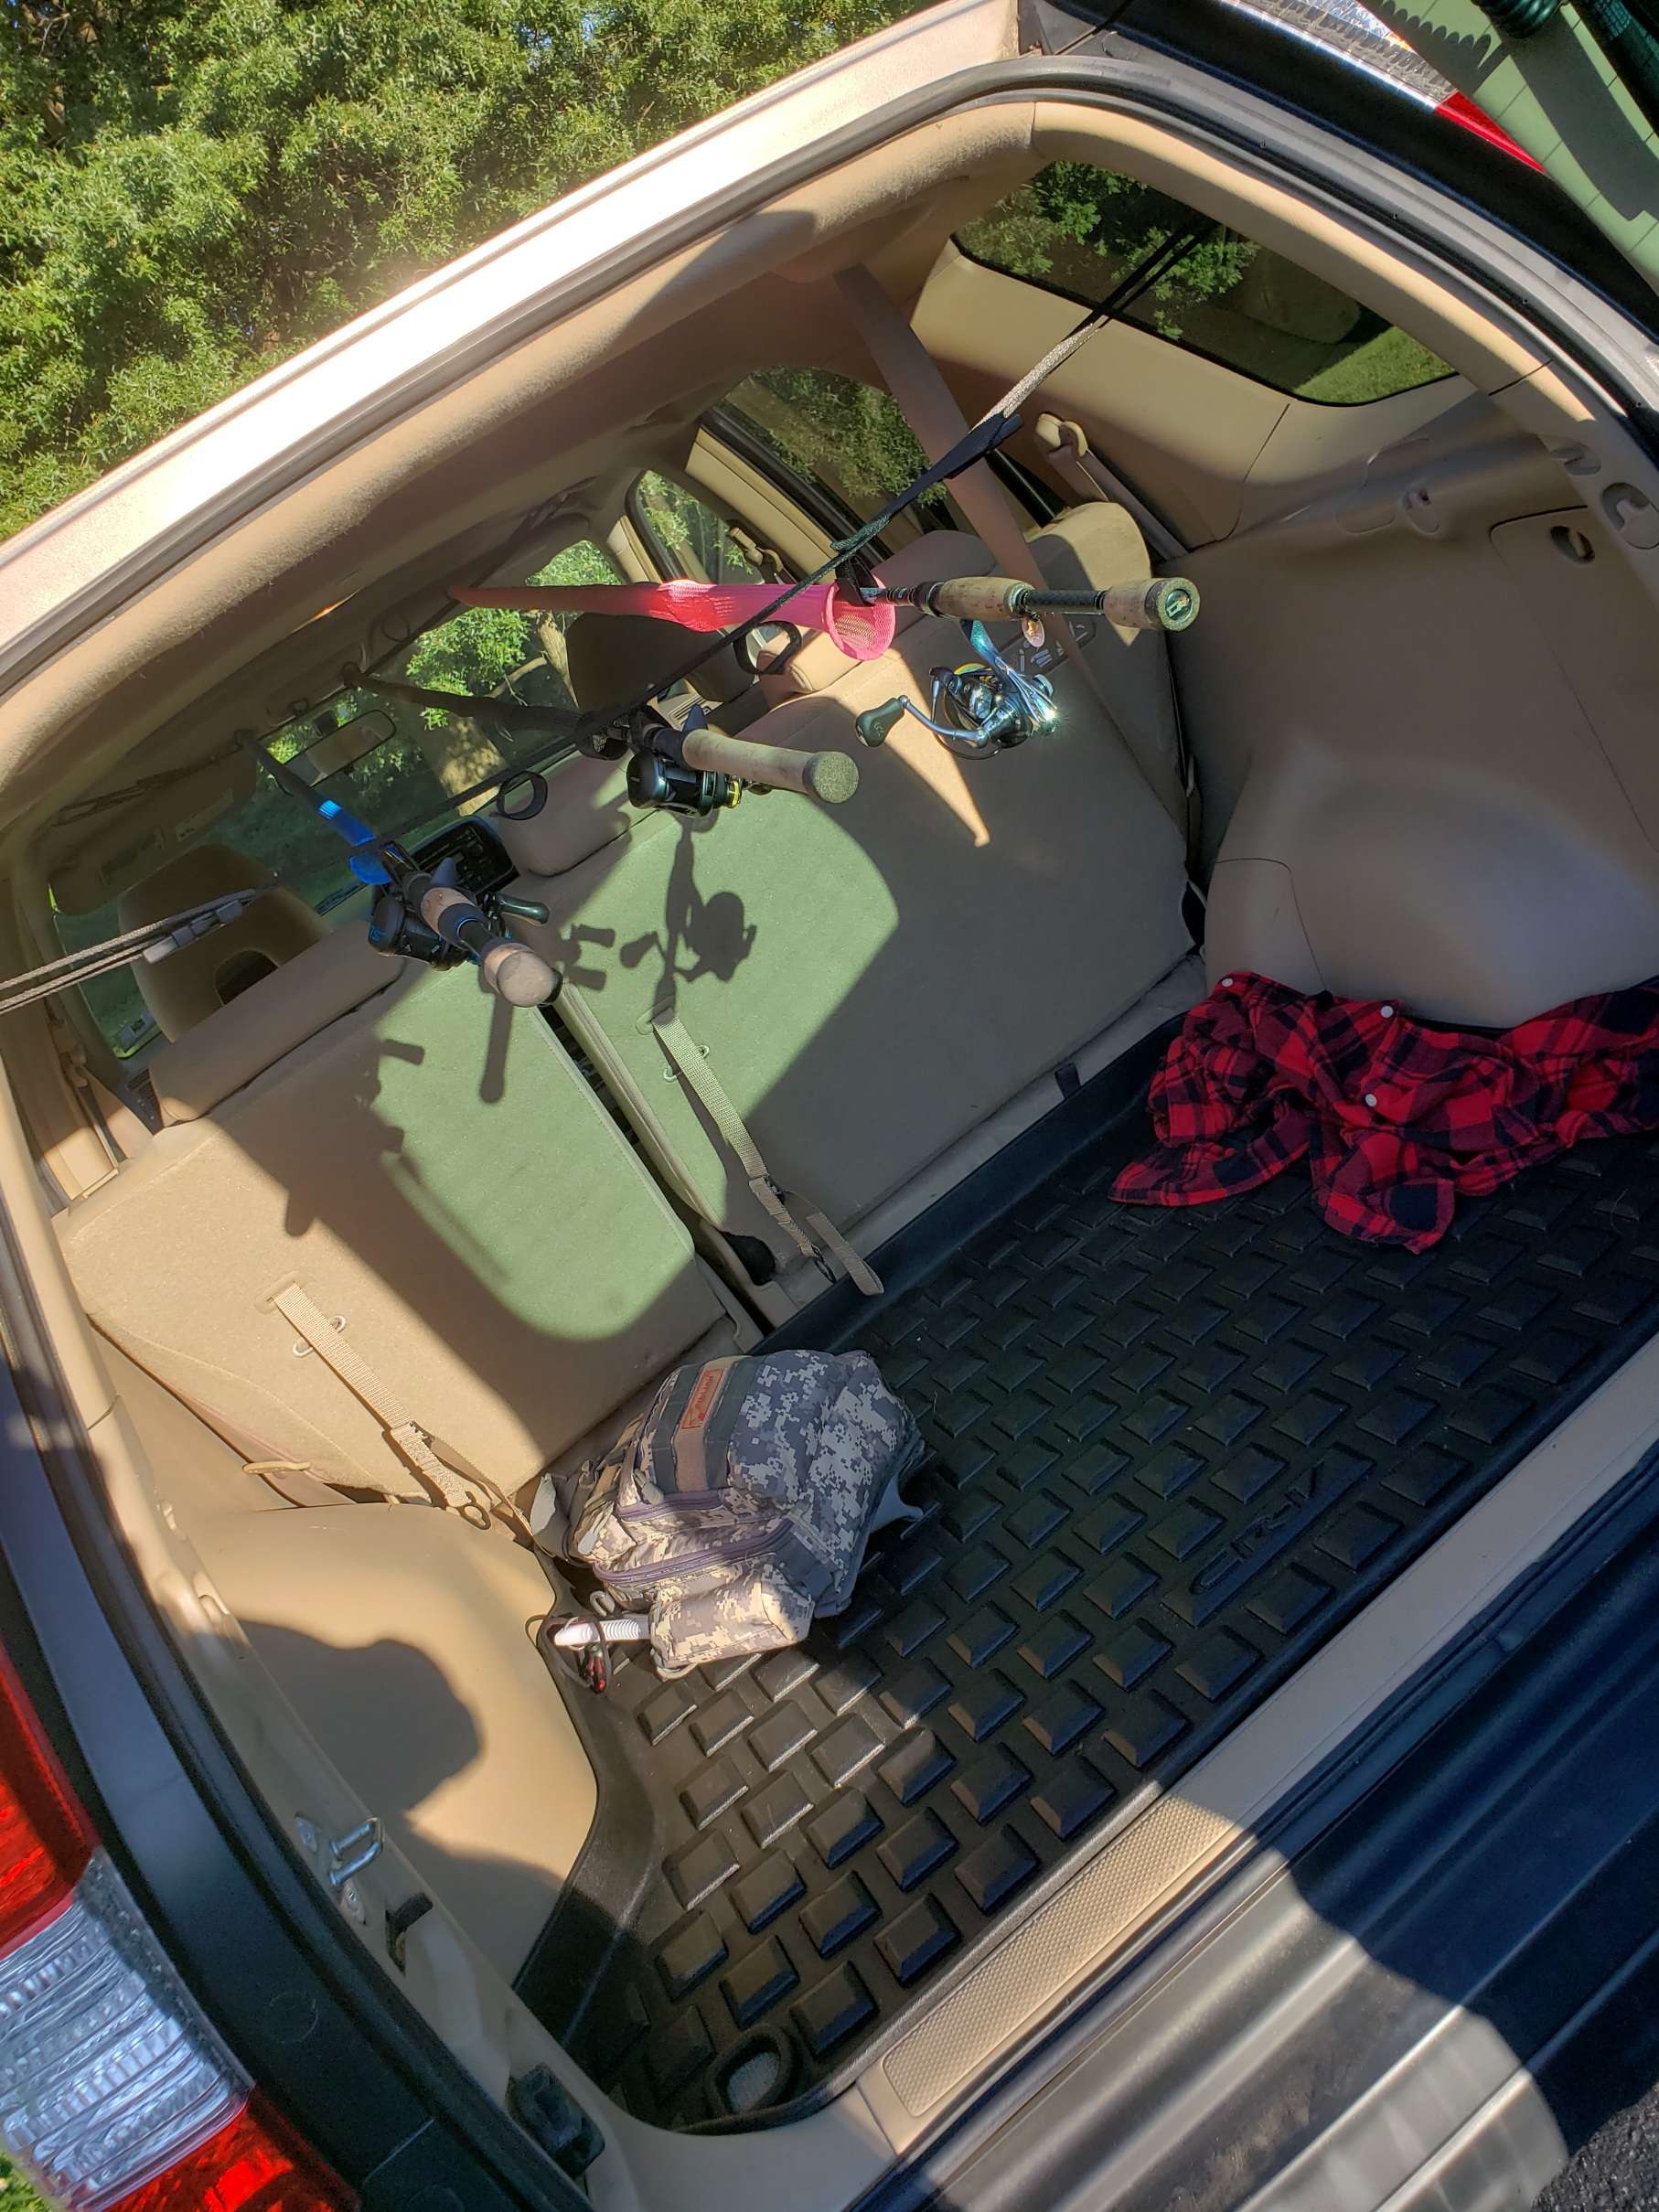 Best option for rod storage inside your car? - Fishing Rods, Reels